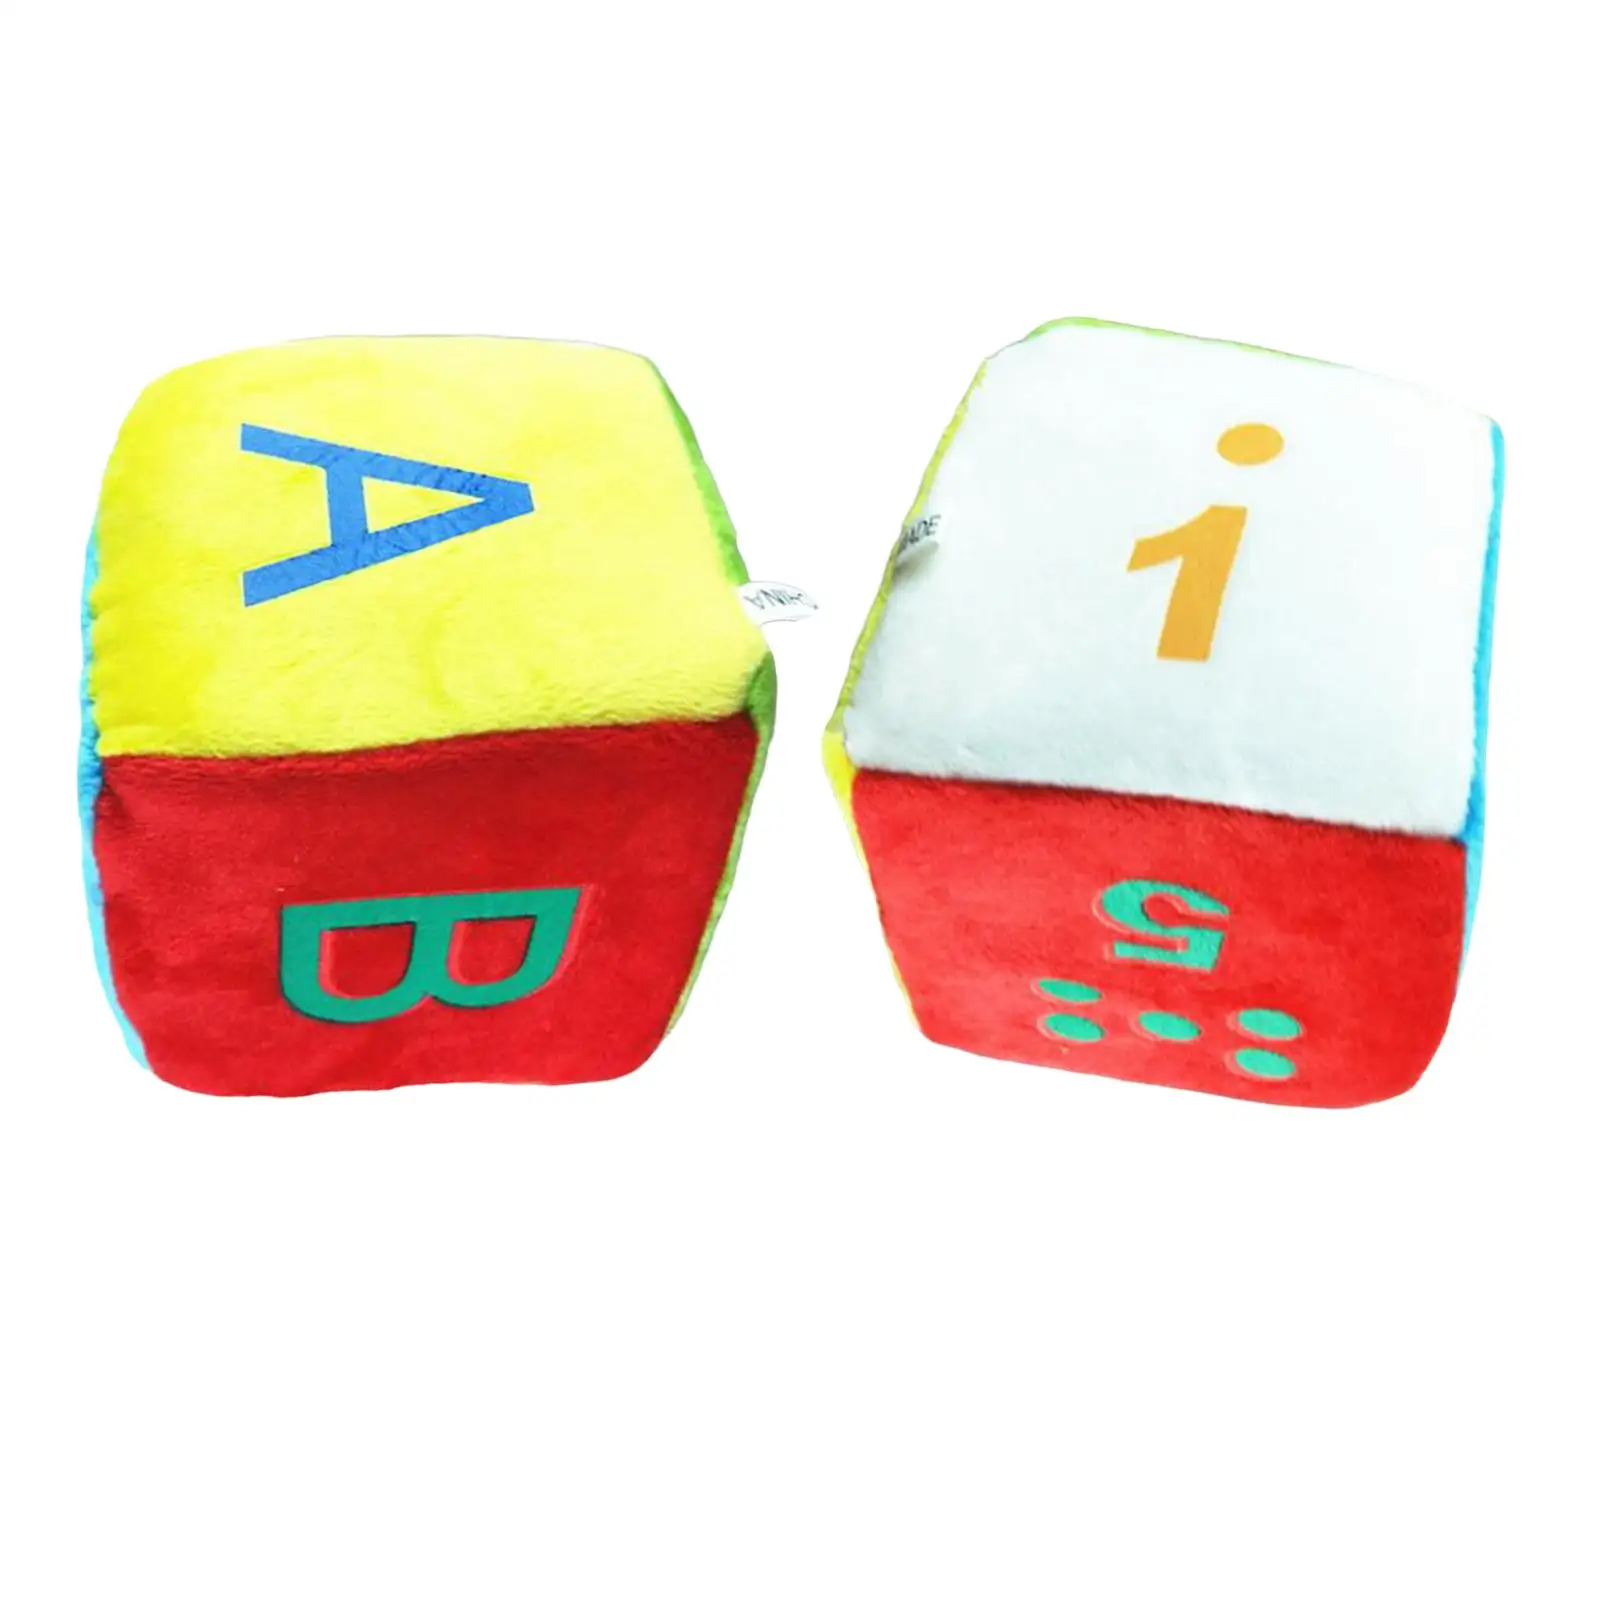 

10cm Dices Toys Soft Plush Early Educational Toys for Party Favors Classrooms Playing Games Party Game Holiday